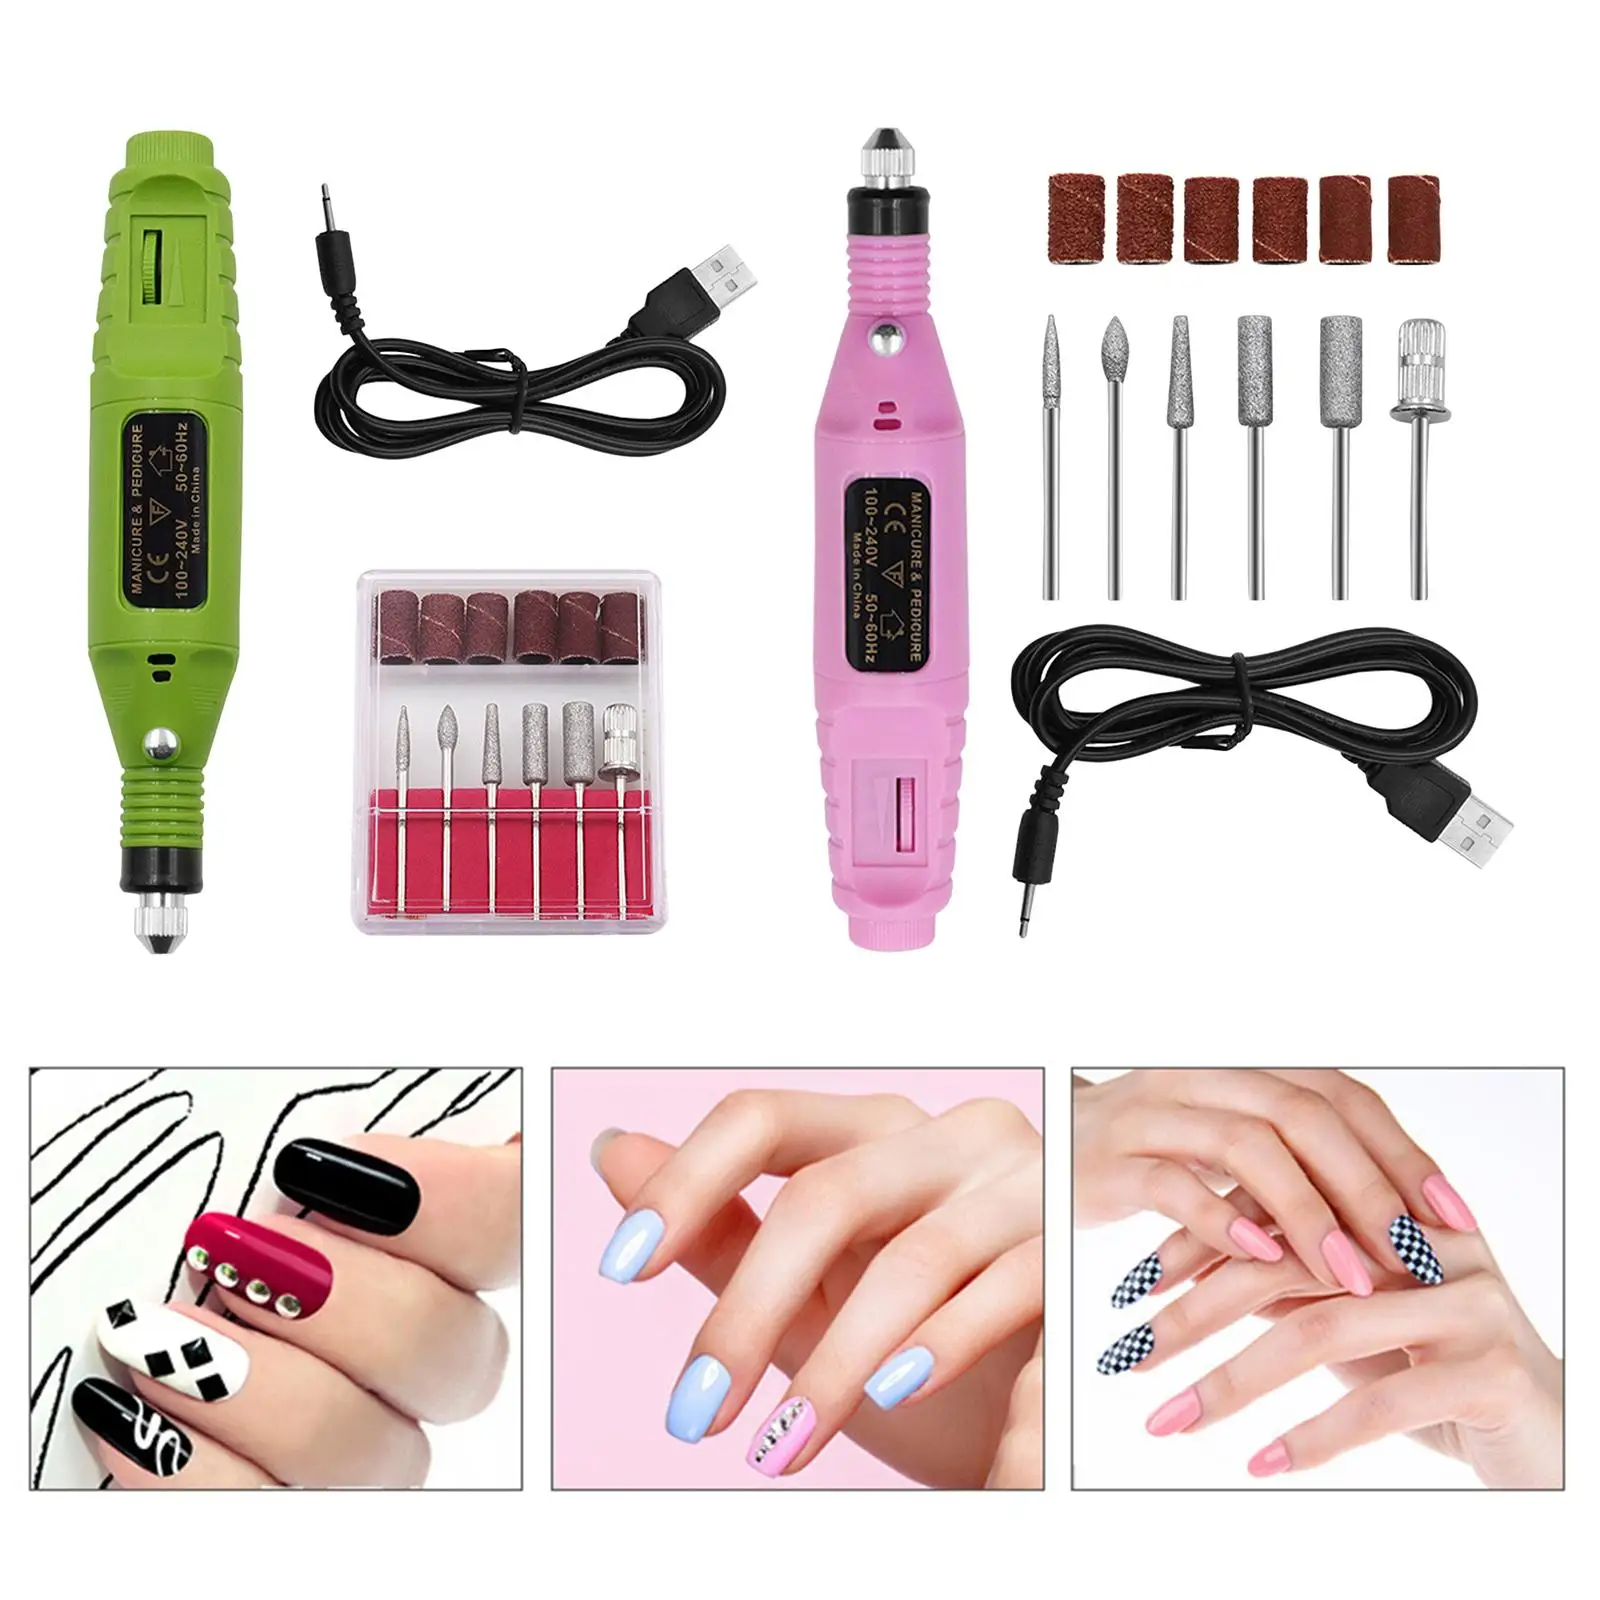 2000RPM Portable Mini Nail Drill Pen Polish Machine Grinder Carver Polisher Sand Bands for Exfoliating Engraving